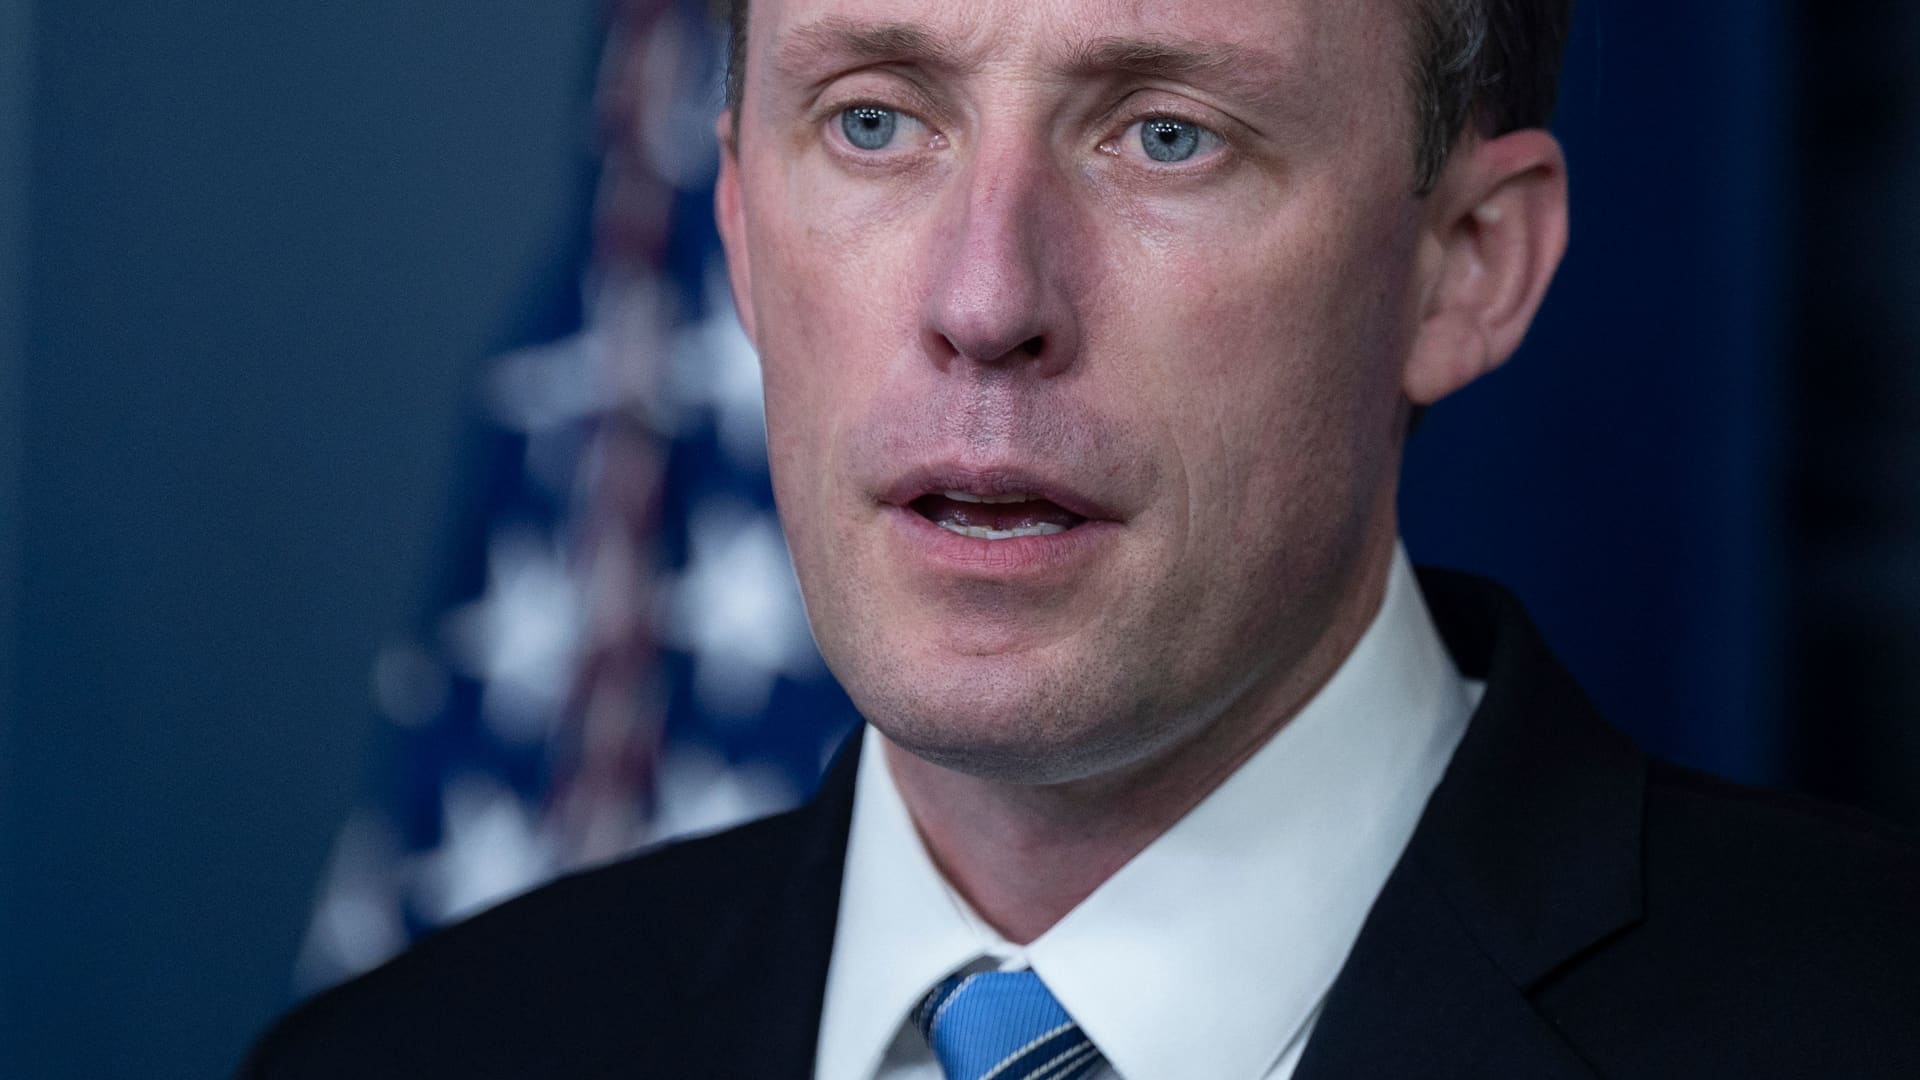 National Security Adviser Jake Sullivan speaks during the daily press briefing at the White House in Washington, DC, on August 23, 2021.